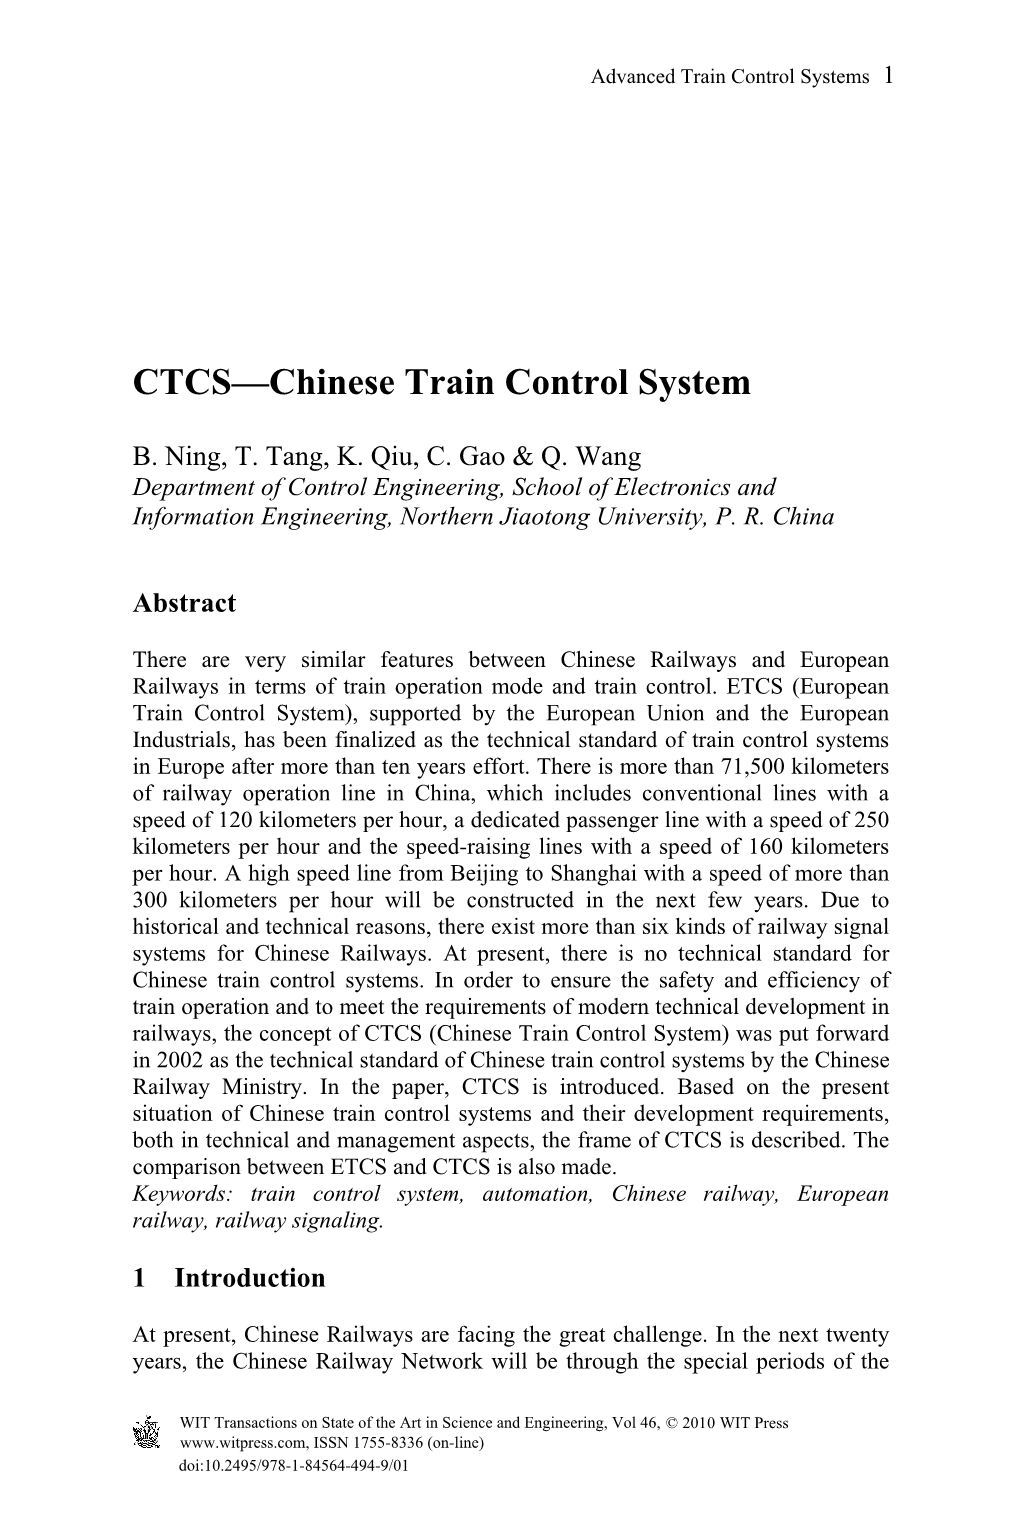 CTCS—Chinese Train Control System